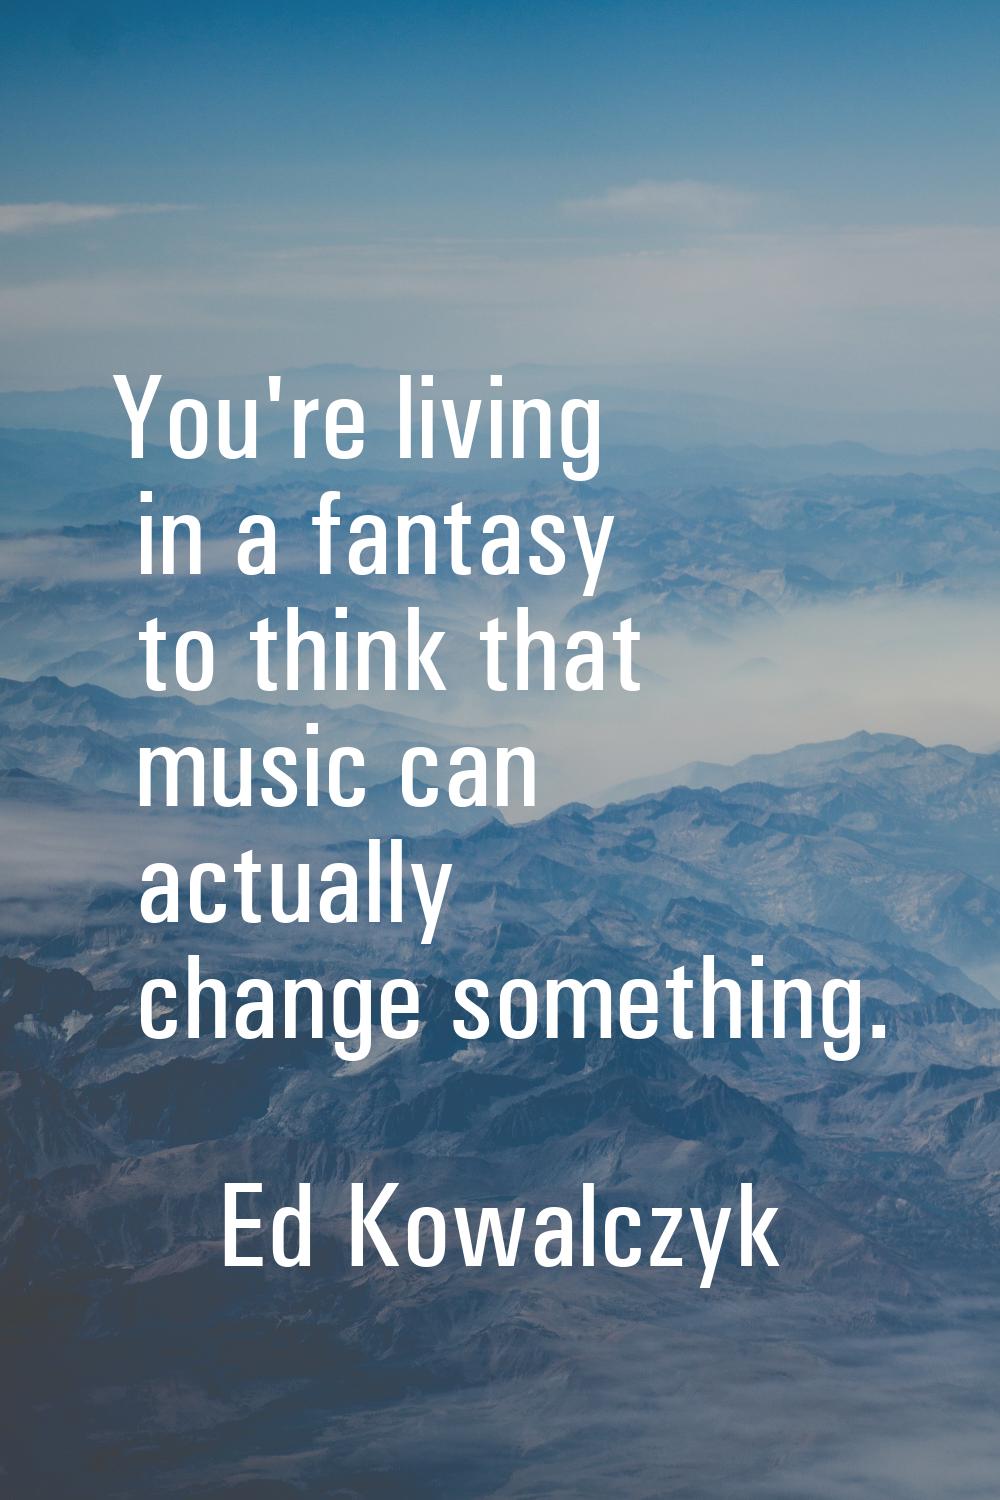 You're living in a fantasy to think that music can actually change something.